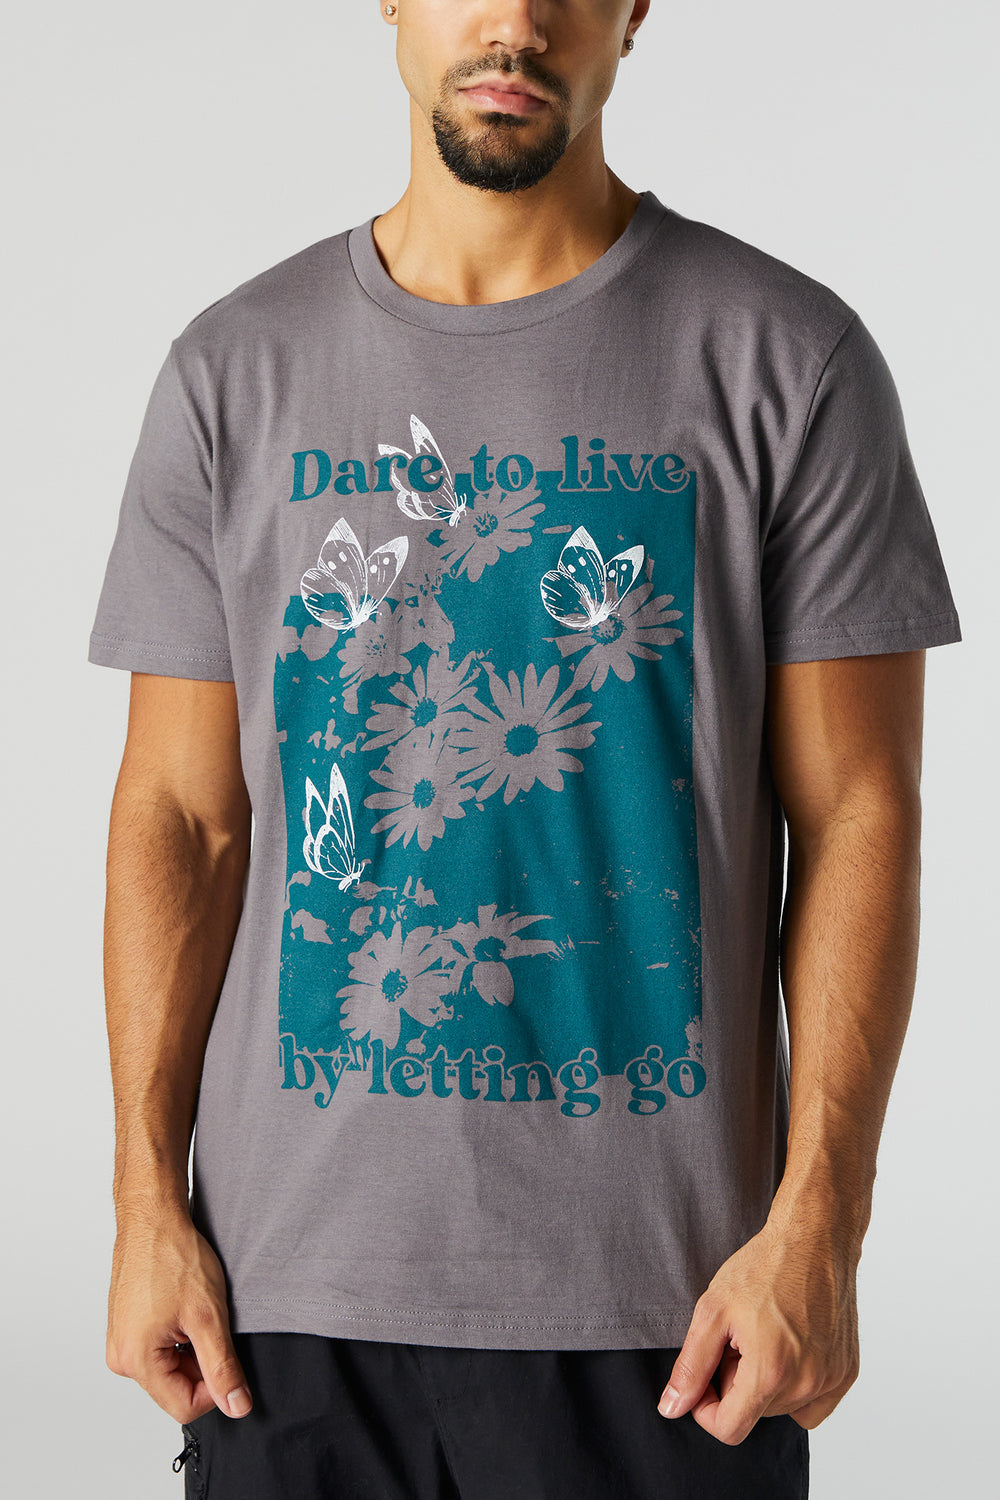 Dare to Live Graphic T-Shirt Dare to Live Graphic T-Shirt 1